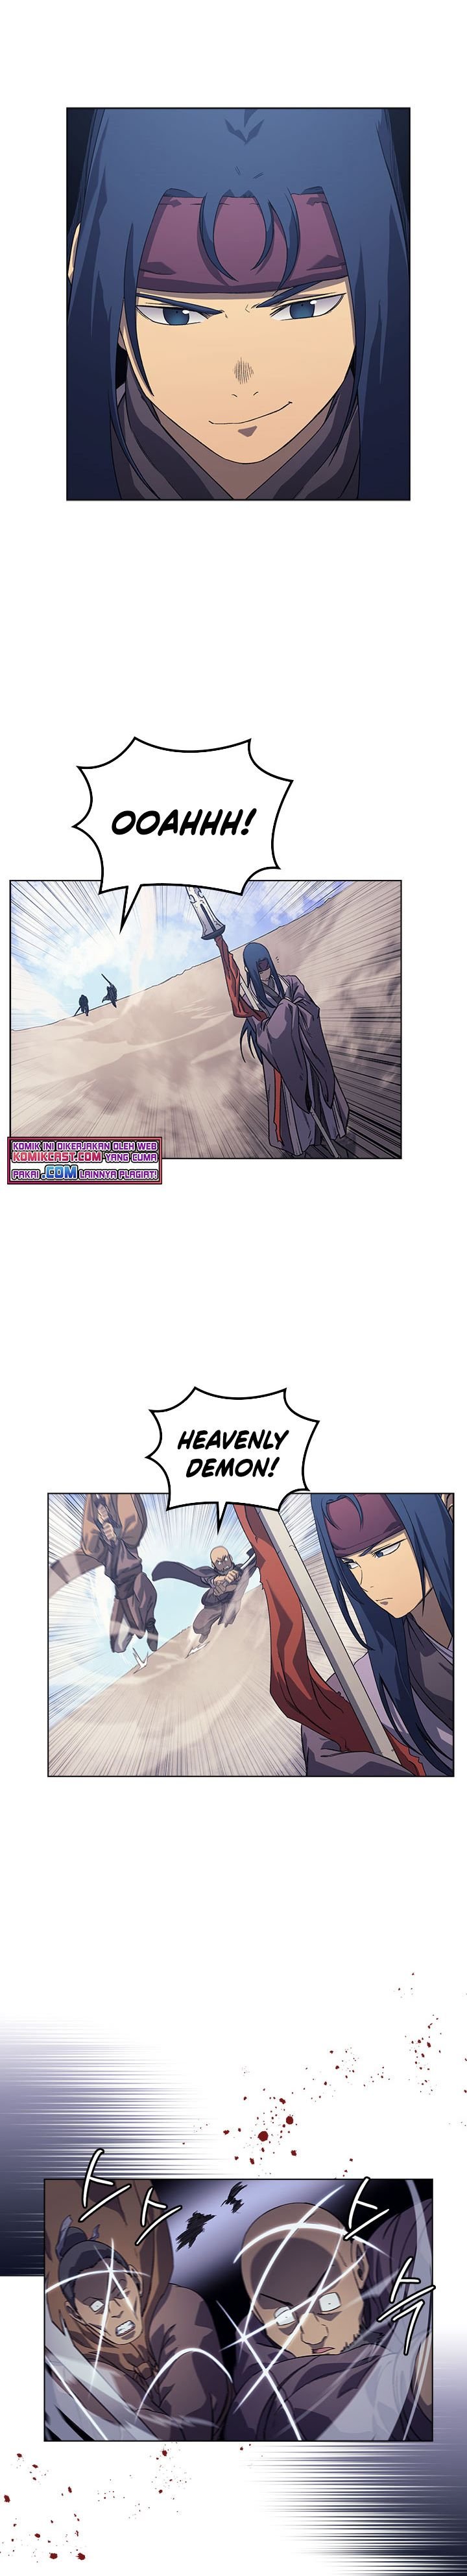 Chronicles of Heavenly Demon Chapter 157